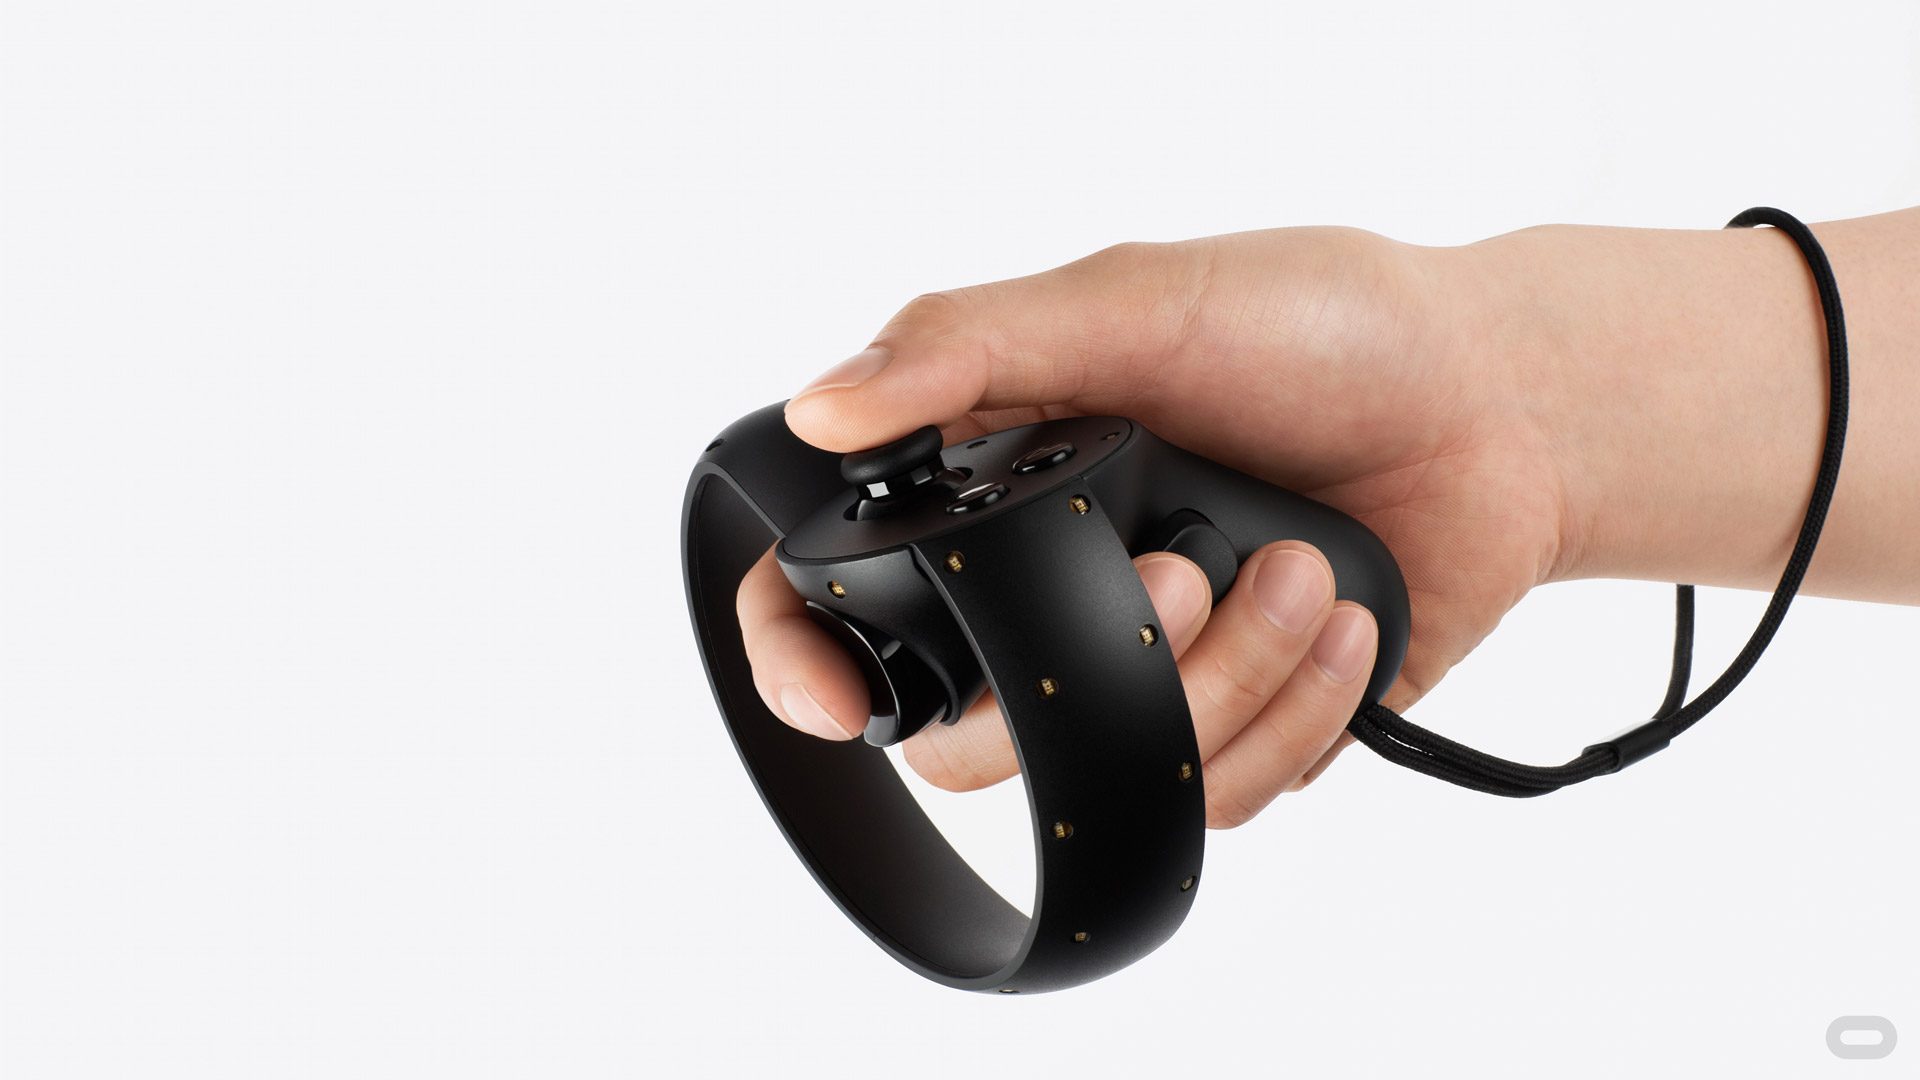 New Oculus Touch Documentation Reveals Capacitive and Recognizable Gestures – Road to VR